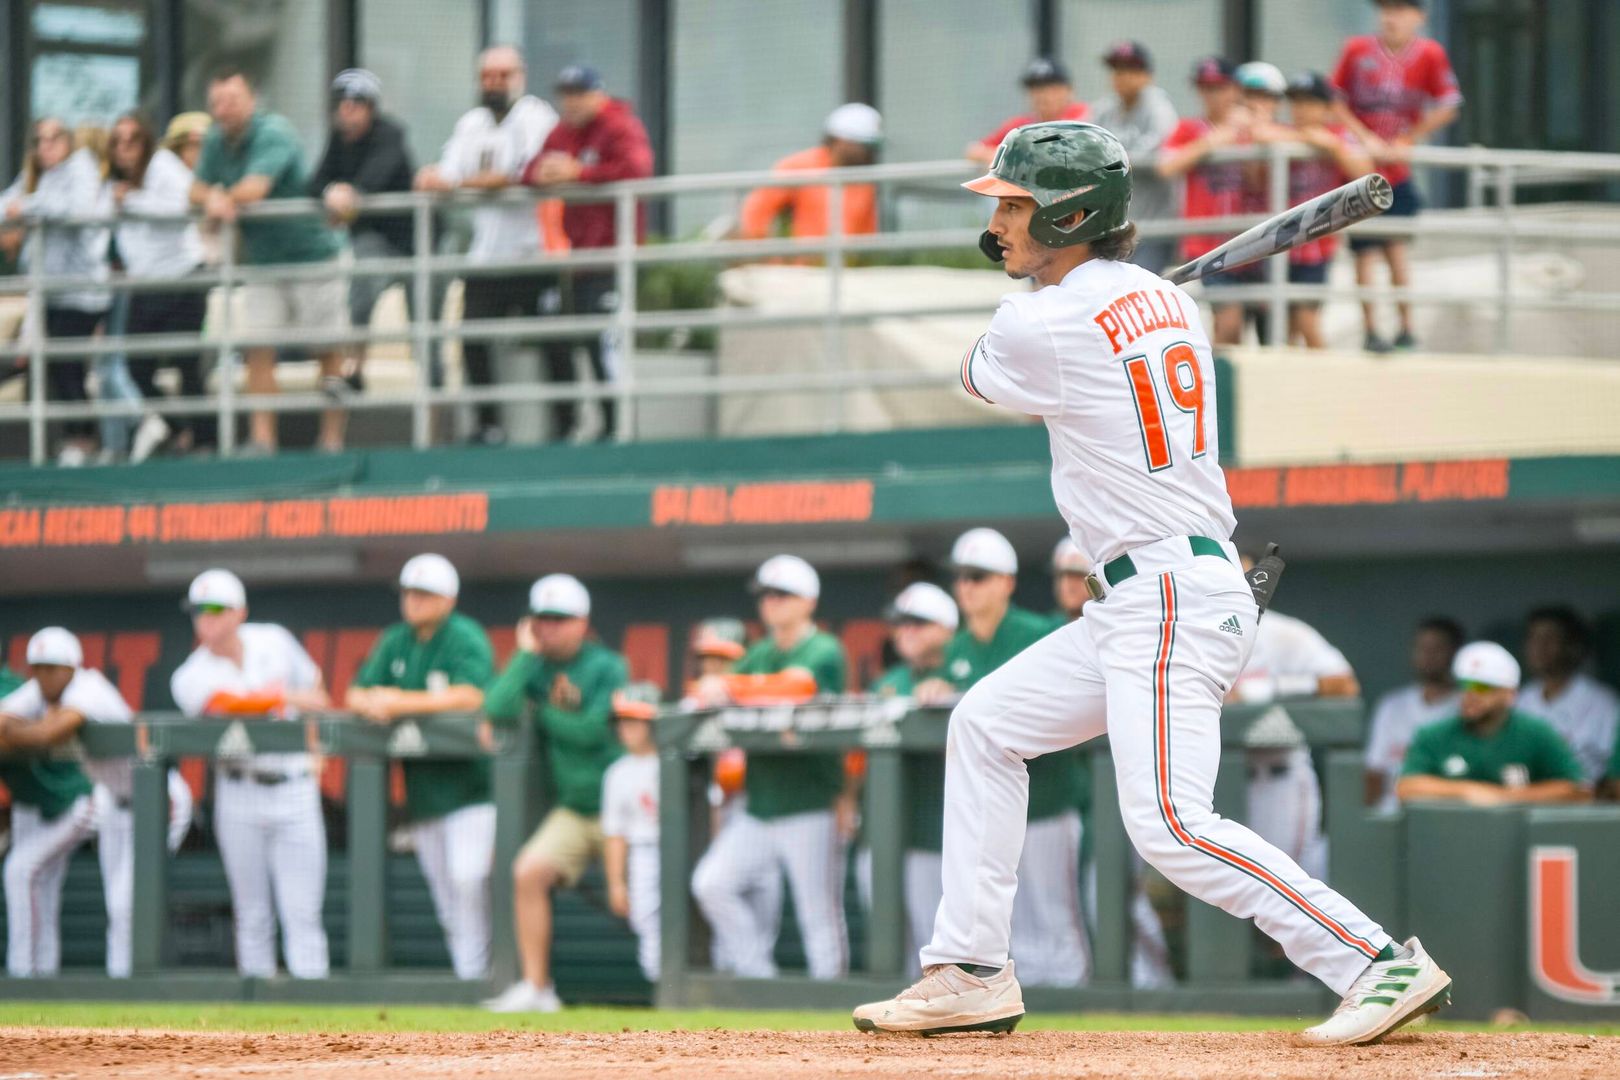 Hurricanes Soar Past Eagles to Clinch ACC Series Win